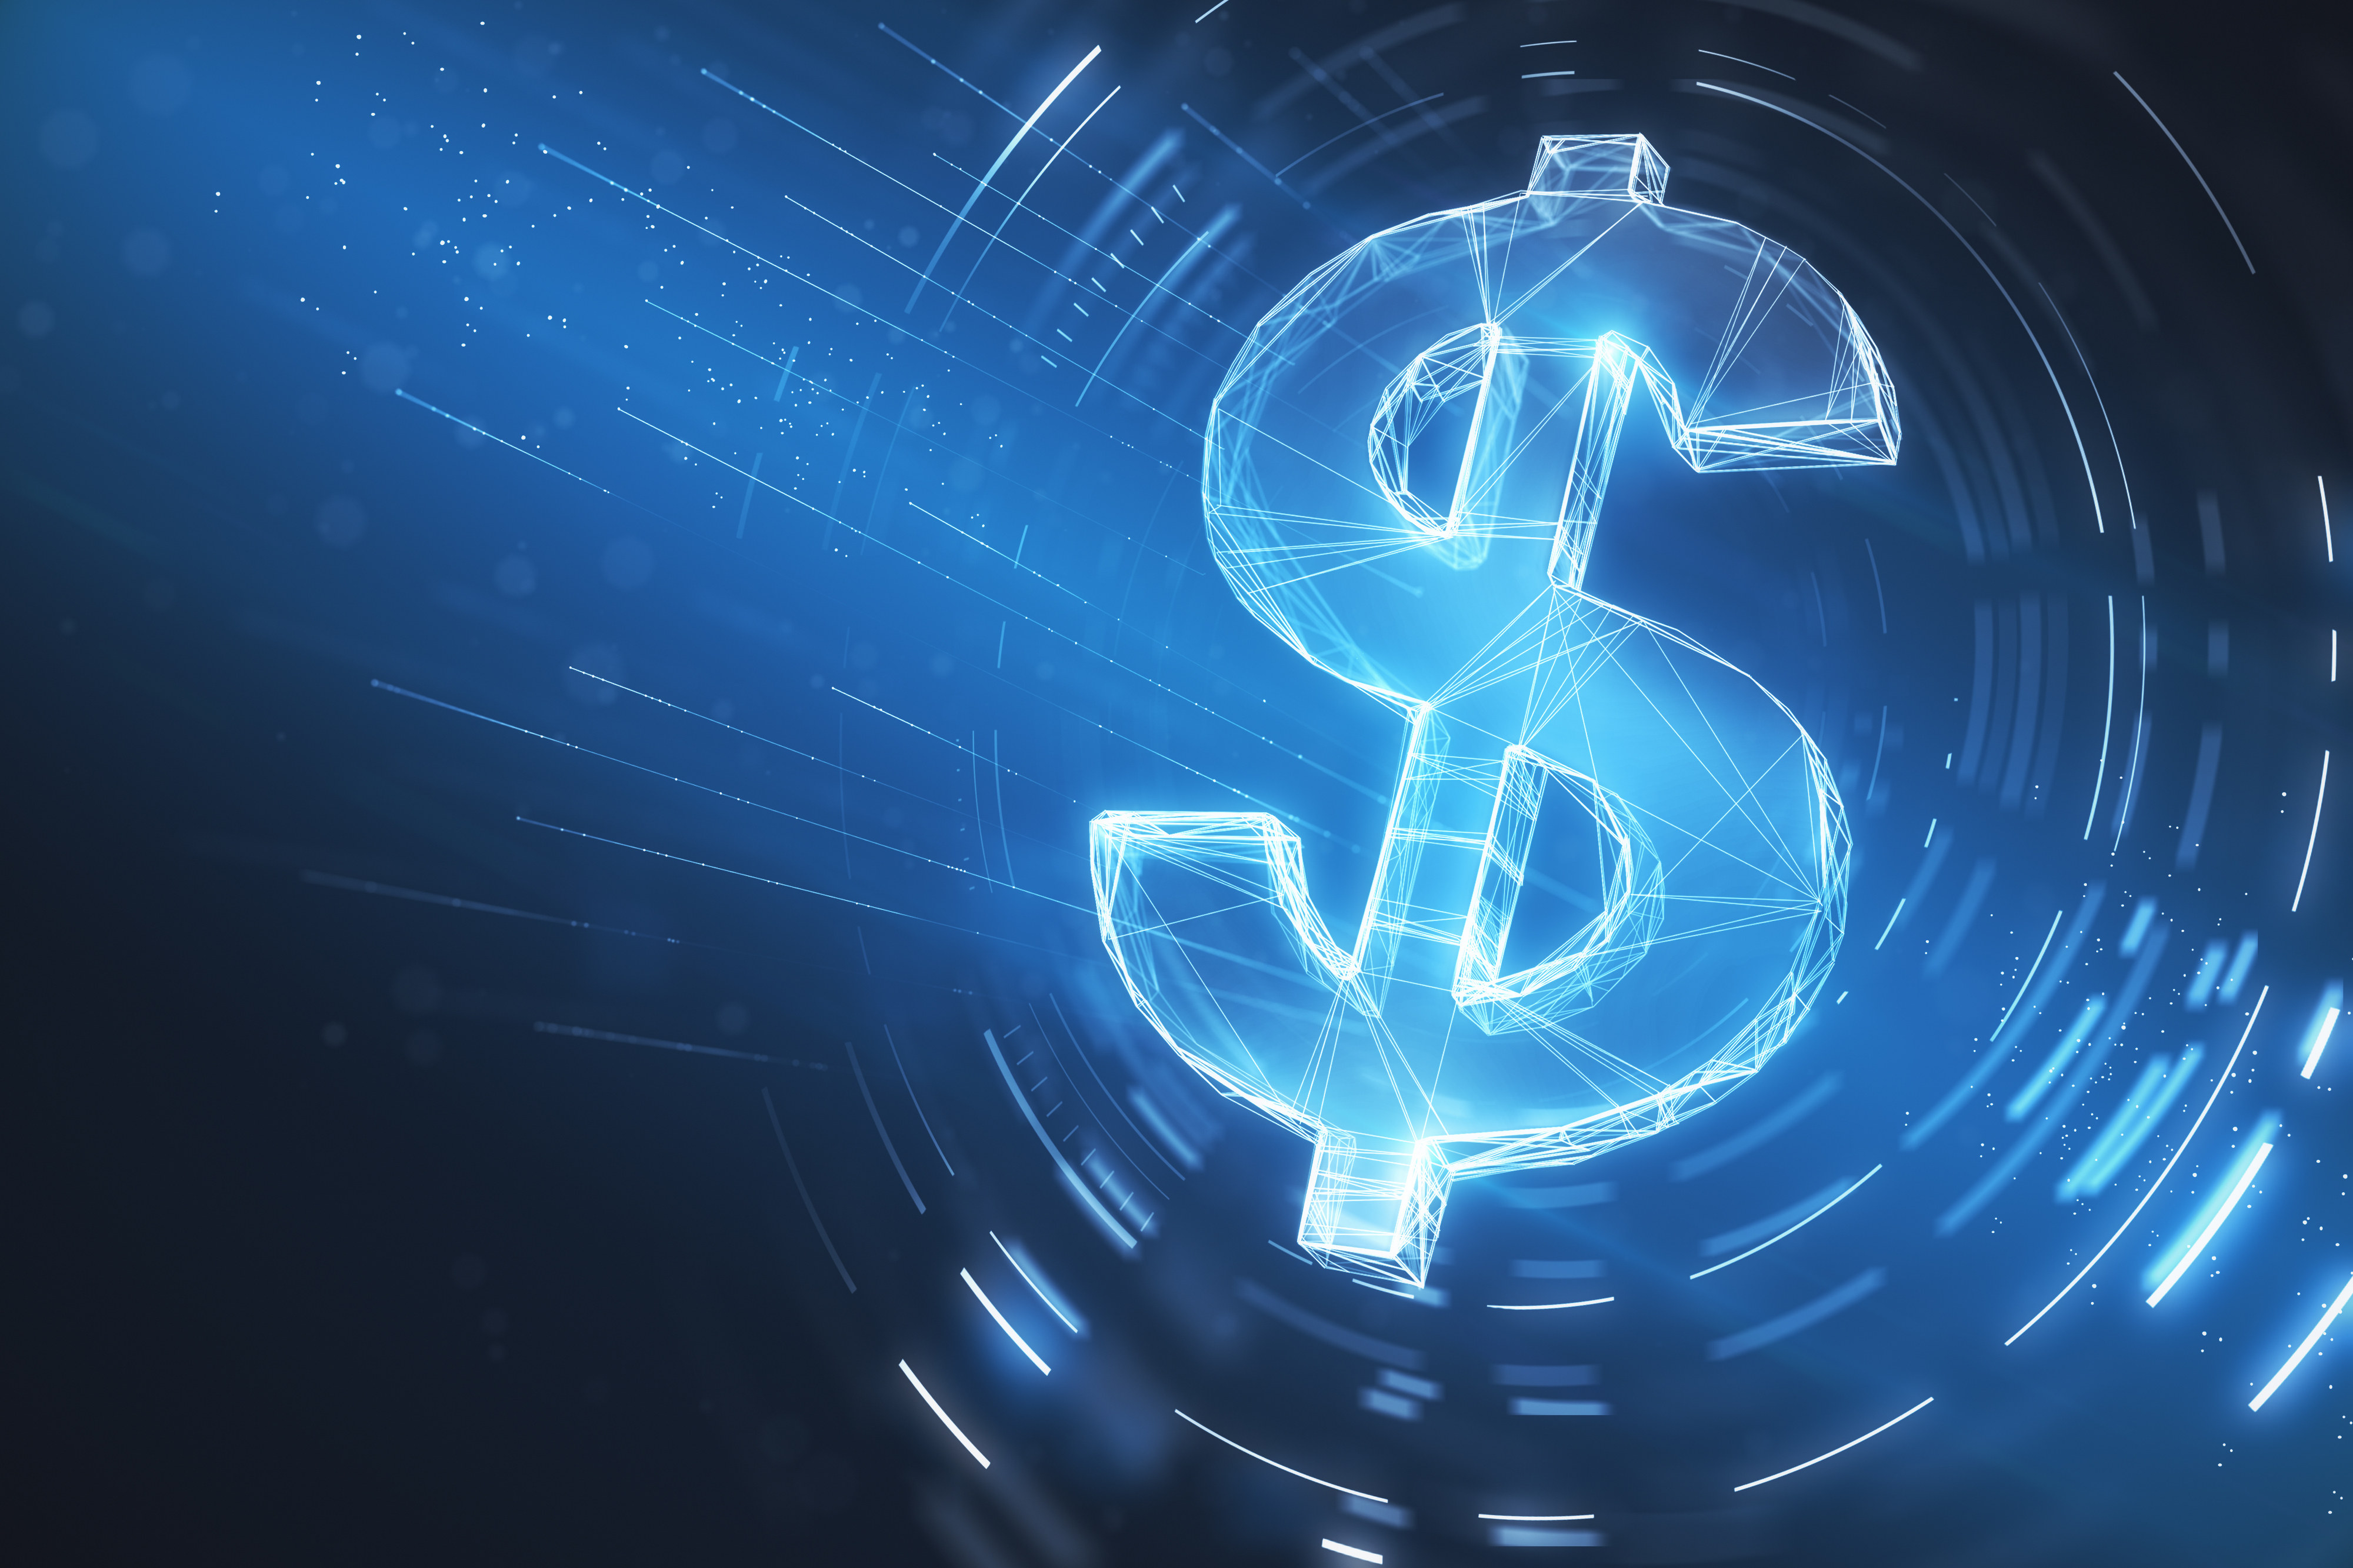 Central bank digital currencies will disrupt the banking industry, forcing traditional lenders to innovate and helping small businesses access financing, according to a report by Standard Chartered and PwC China. Photo: Shutterstock